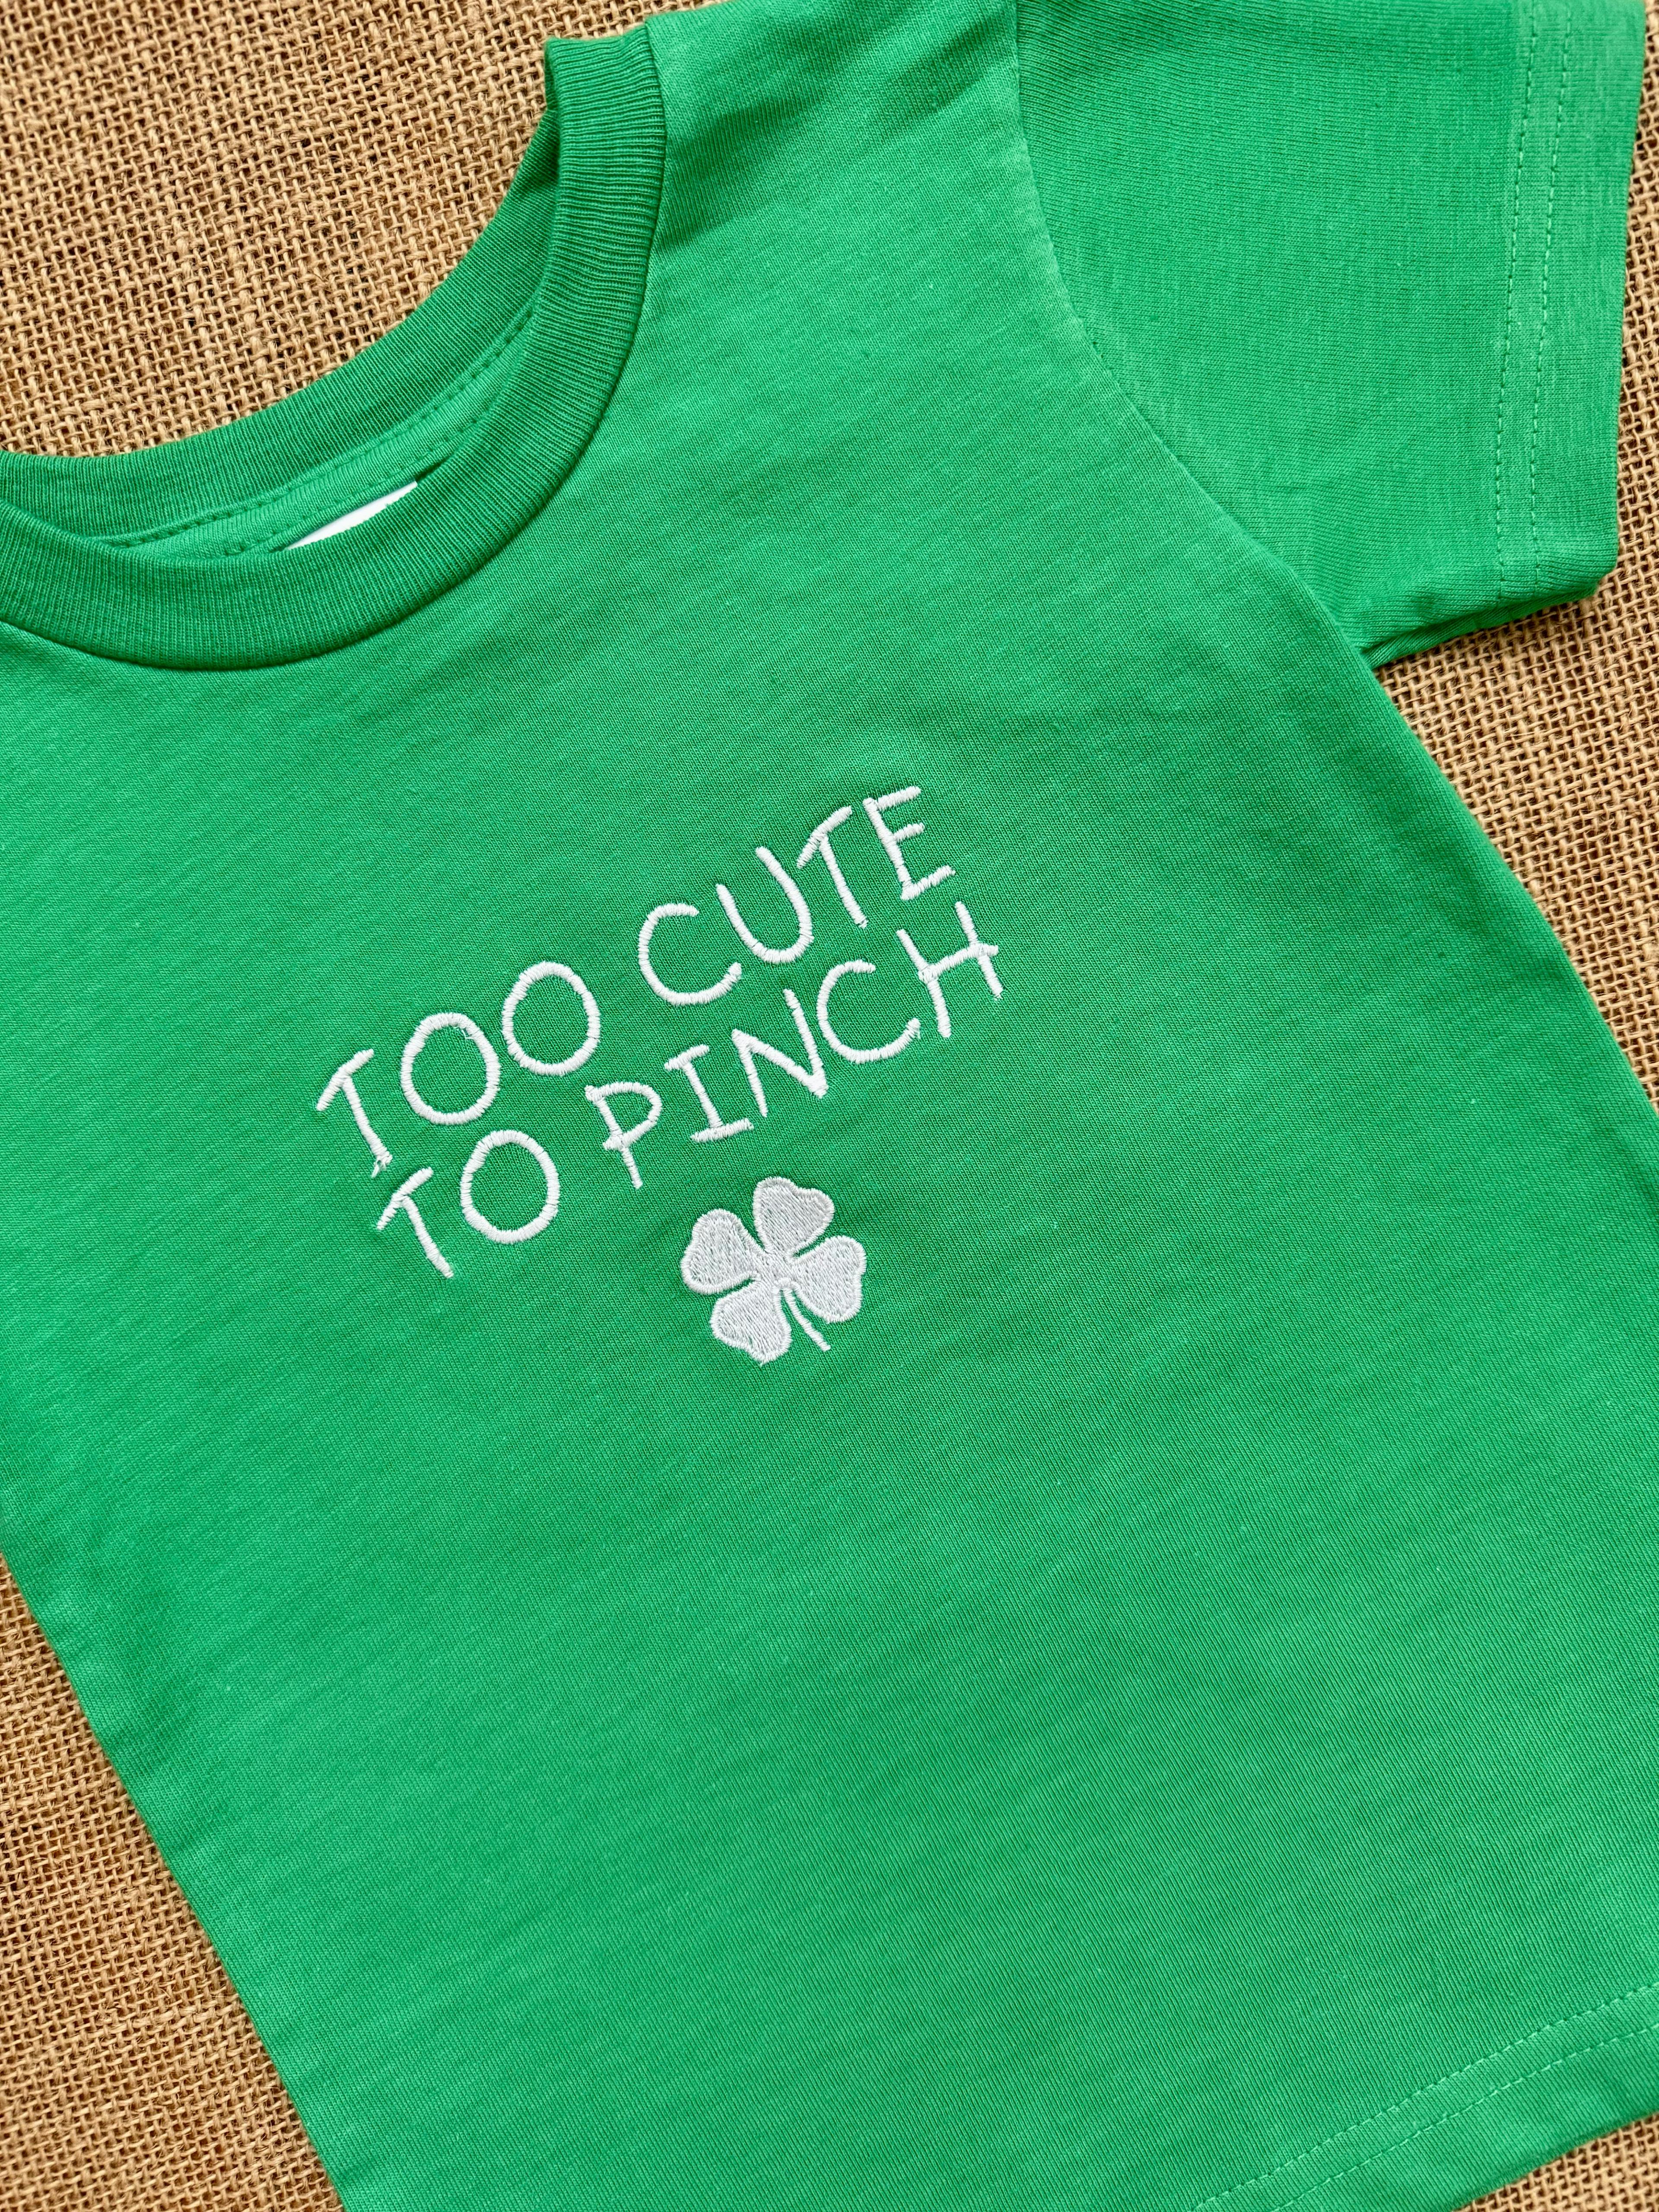 Embroidered St. Patrick’s Day shirt